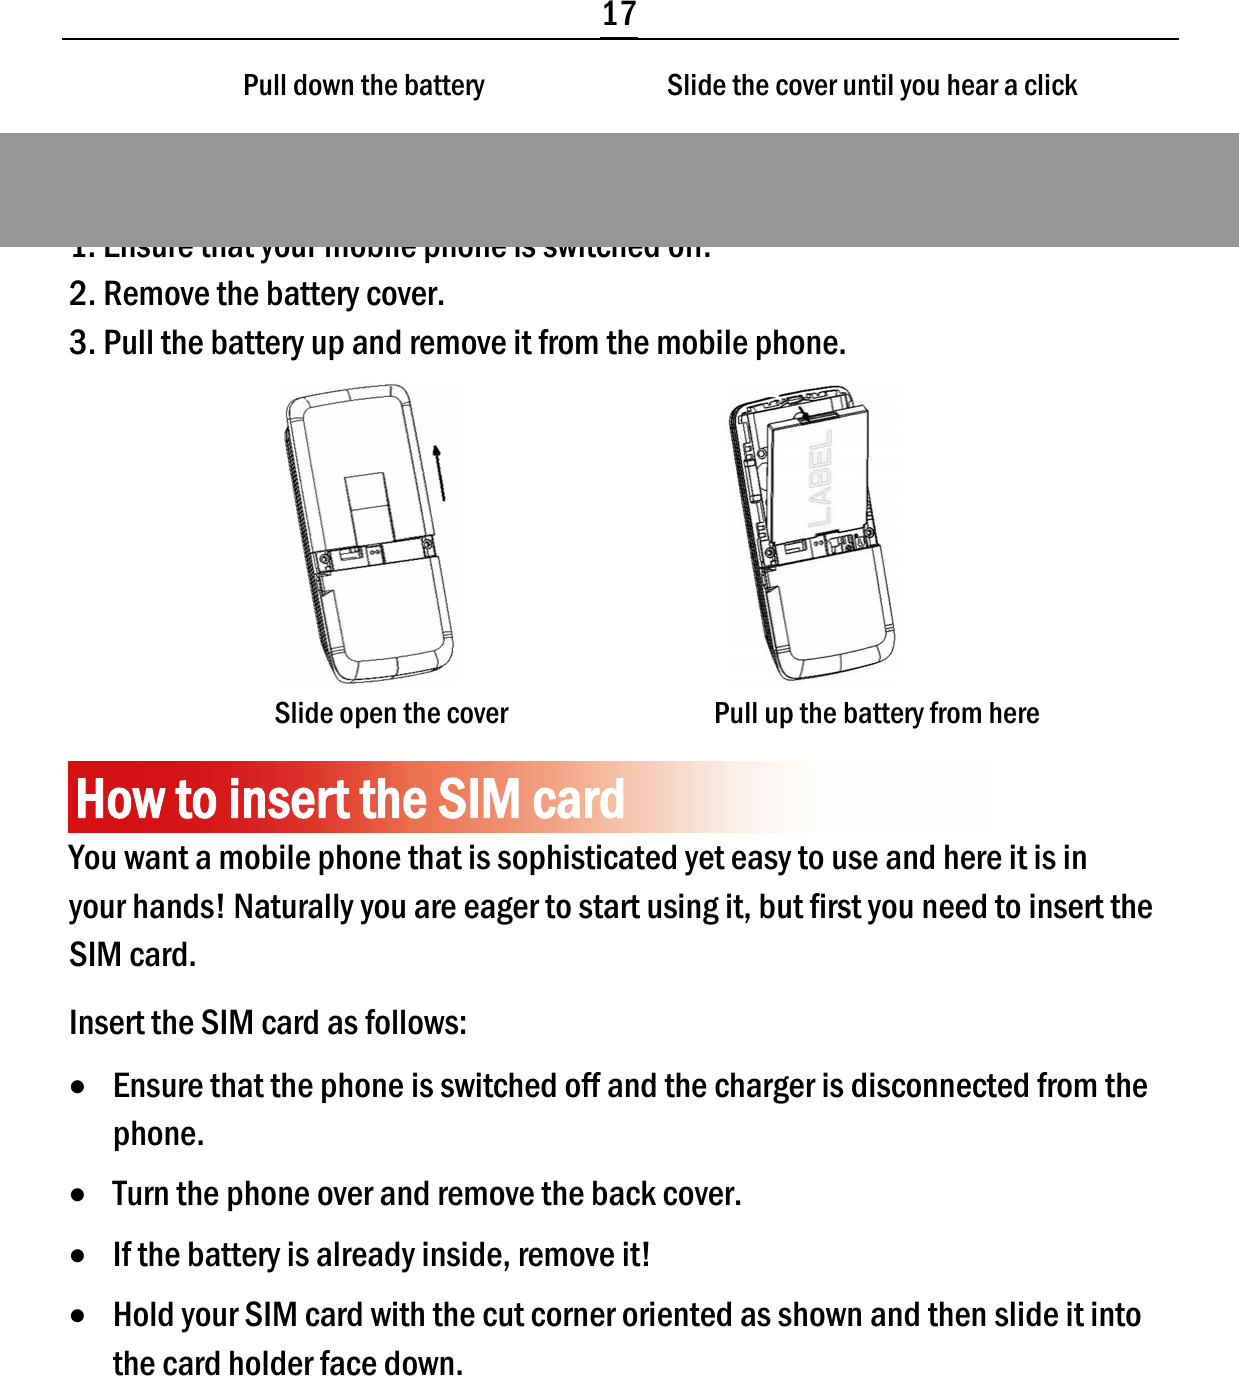  17 Pull down the battery                               Slide the cover until you hear a click     Removing the battery 1. Ensure that your mobile phone is switched off. 2. Remove the battery cover. 3. Pull the battery up and remove it from the mobile phone.                                          Slide open the cover                                   Pull up the battery from here  How to insert the SIM card You want a mobile phone that is sophisticated yet easy to use and here it is in your hands! Naturally you are eager to start using it, but first you need to insert the SIM card. Insert the SIM card as follows: • Ensure that the phone is switched off and the charger is disconnected from the phone. • Turn the phone over and remove the back cover. • If the battery is already inside, remove it! • Hold your SIM card with the cut corner oriented as shown and then slide it into the card holder face down. 